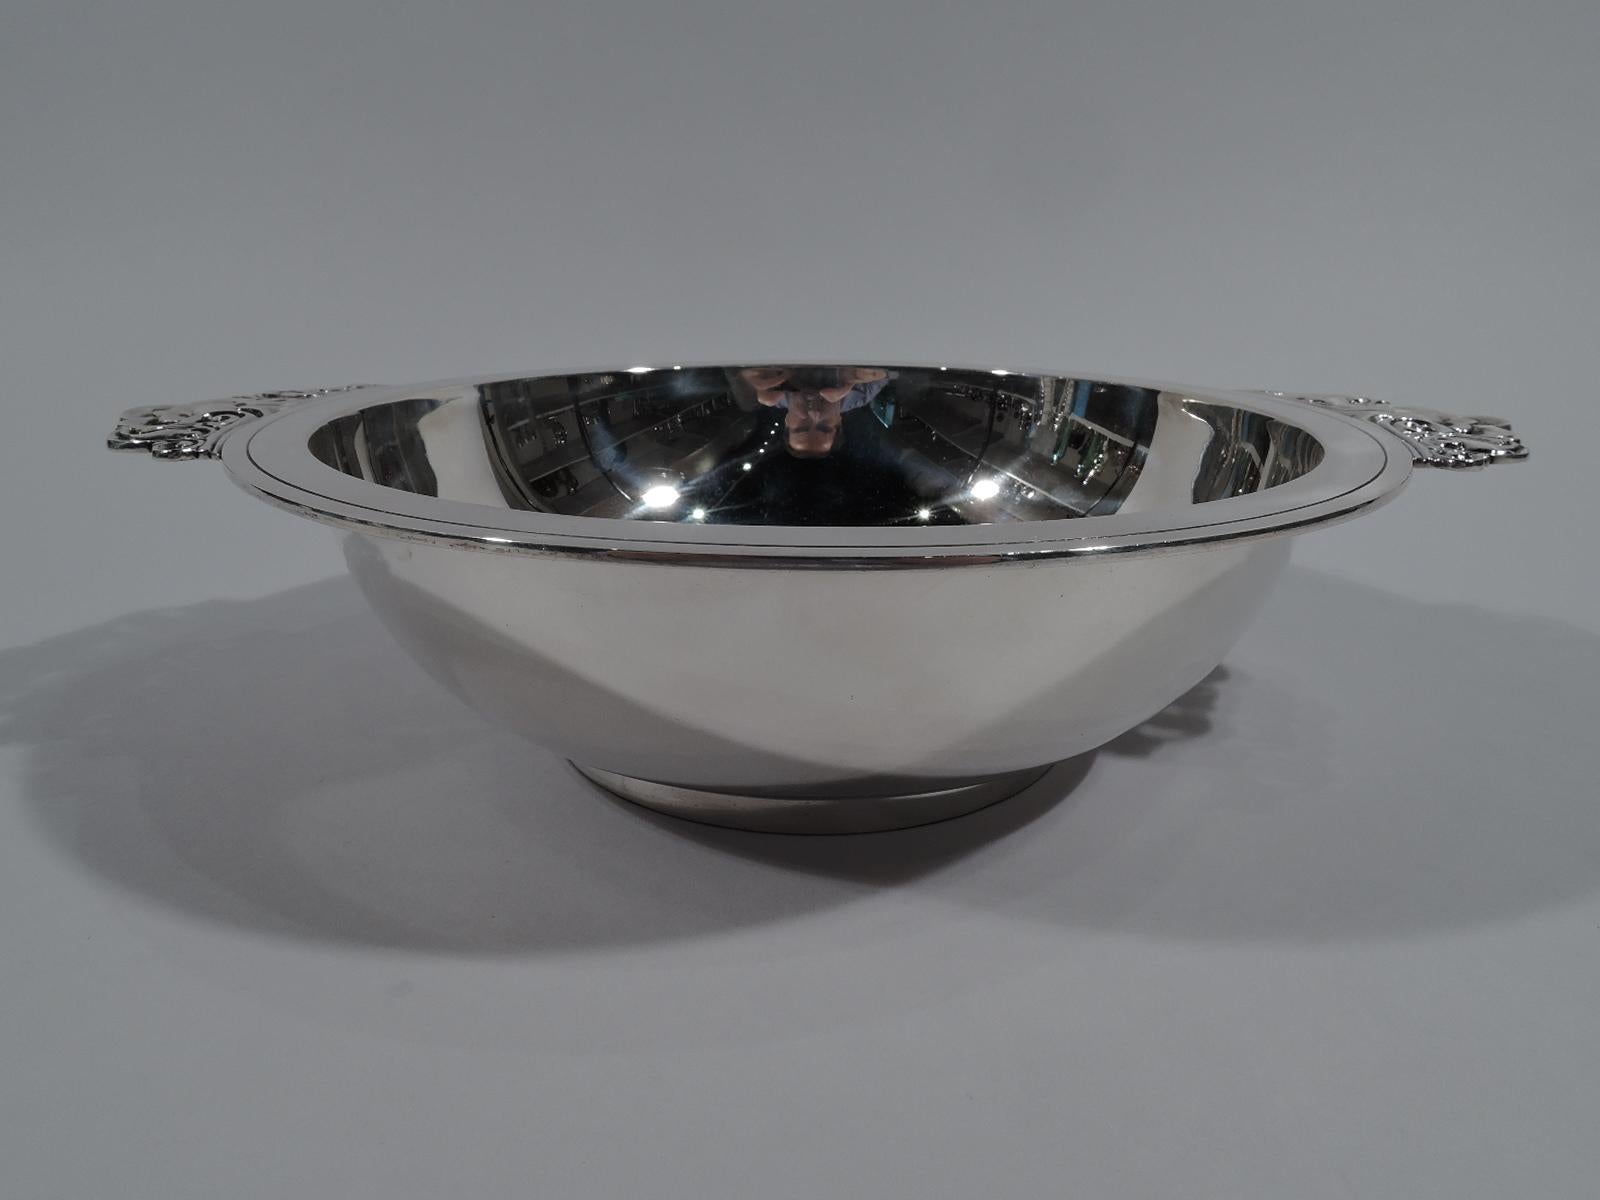 Art Deco sterling silver bowl. Made by Tiffany & Co. in New York, circa 1939. Round with flat rim and short foot ring. Mounted side handles comprising chased and pierced flowers and scrolls. Fully marked including pattern no. 22837 (first produced